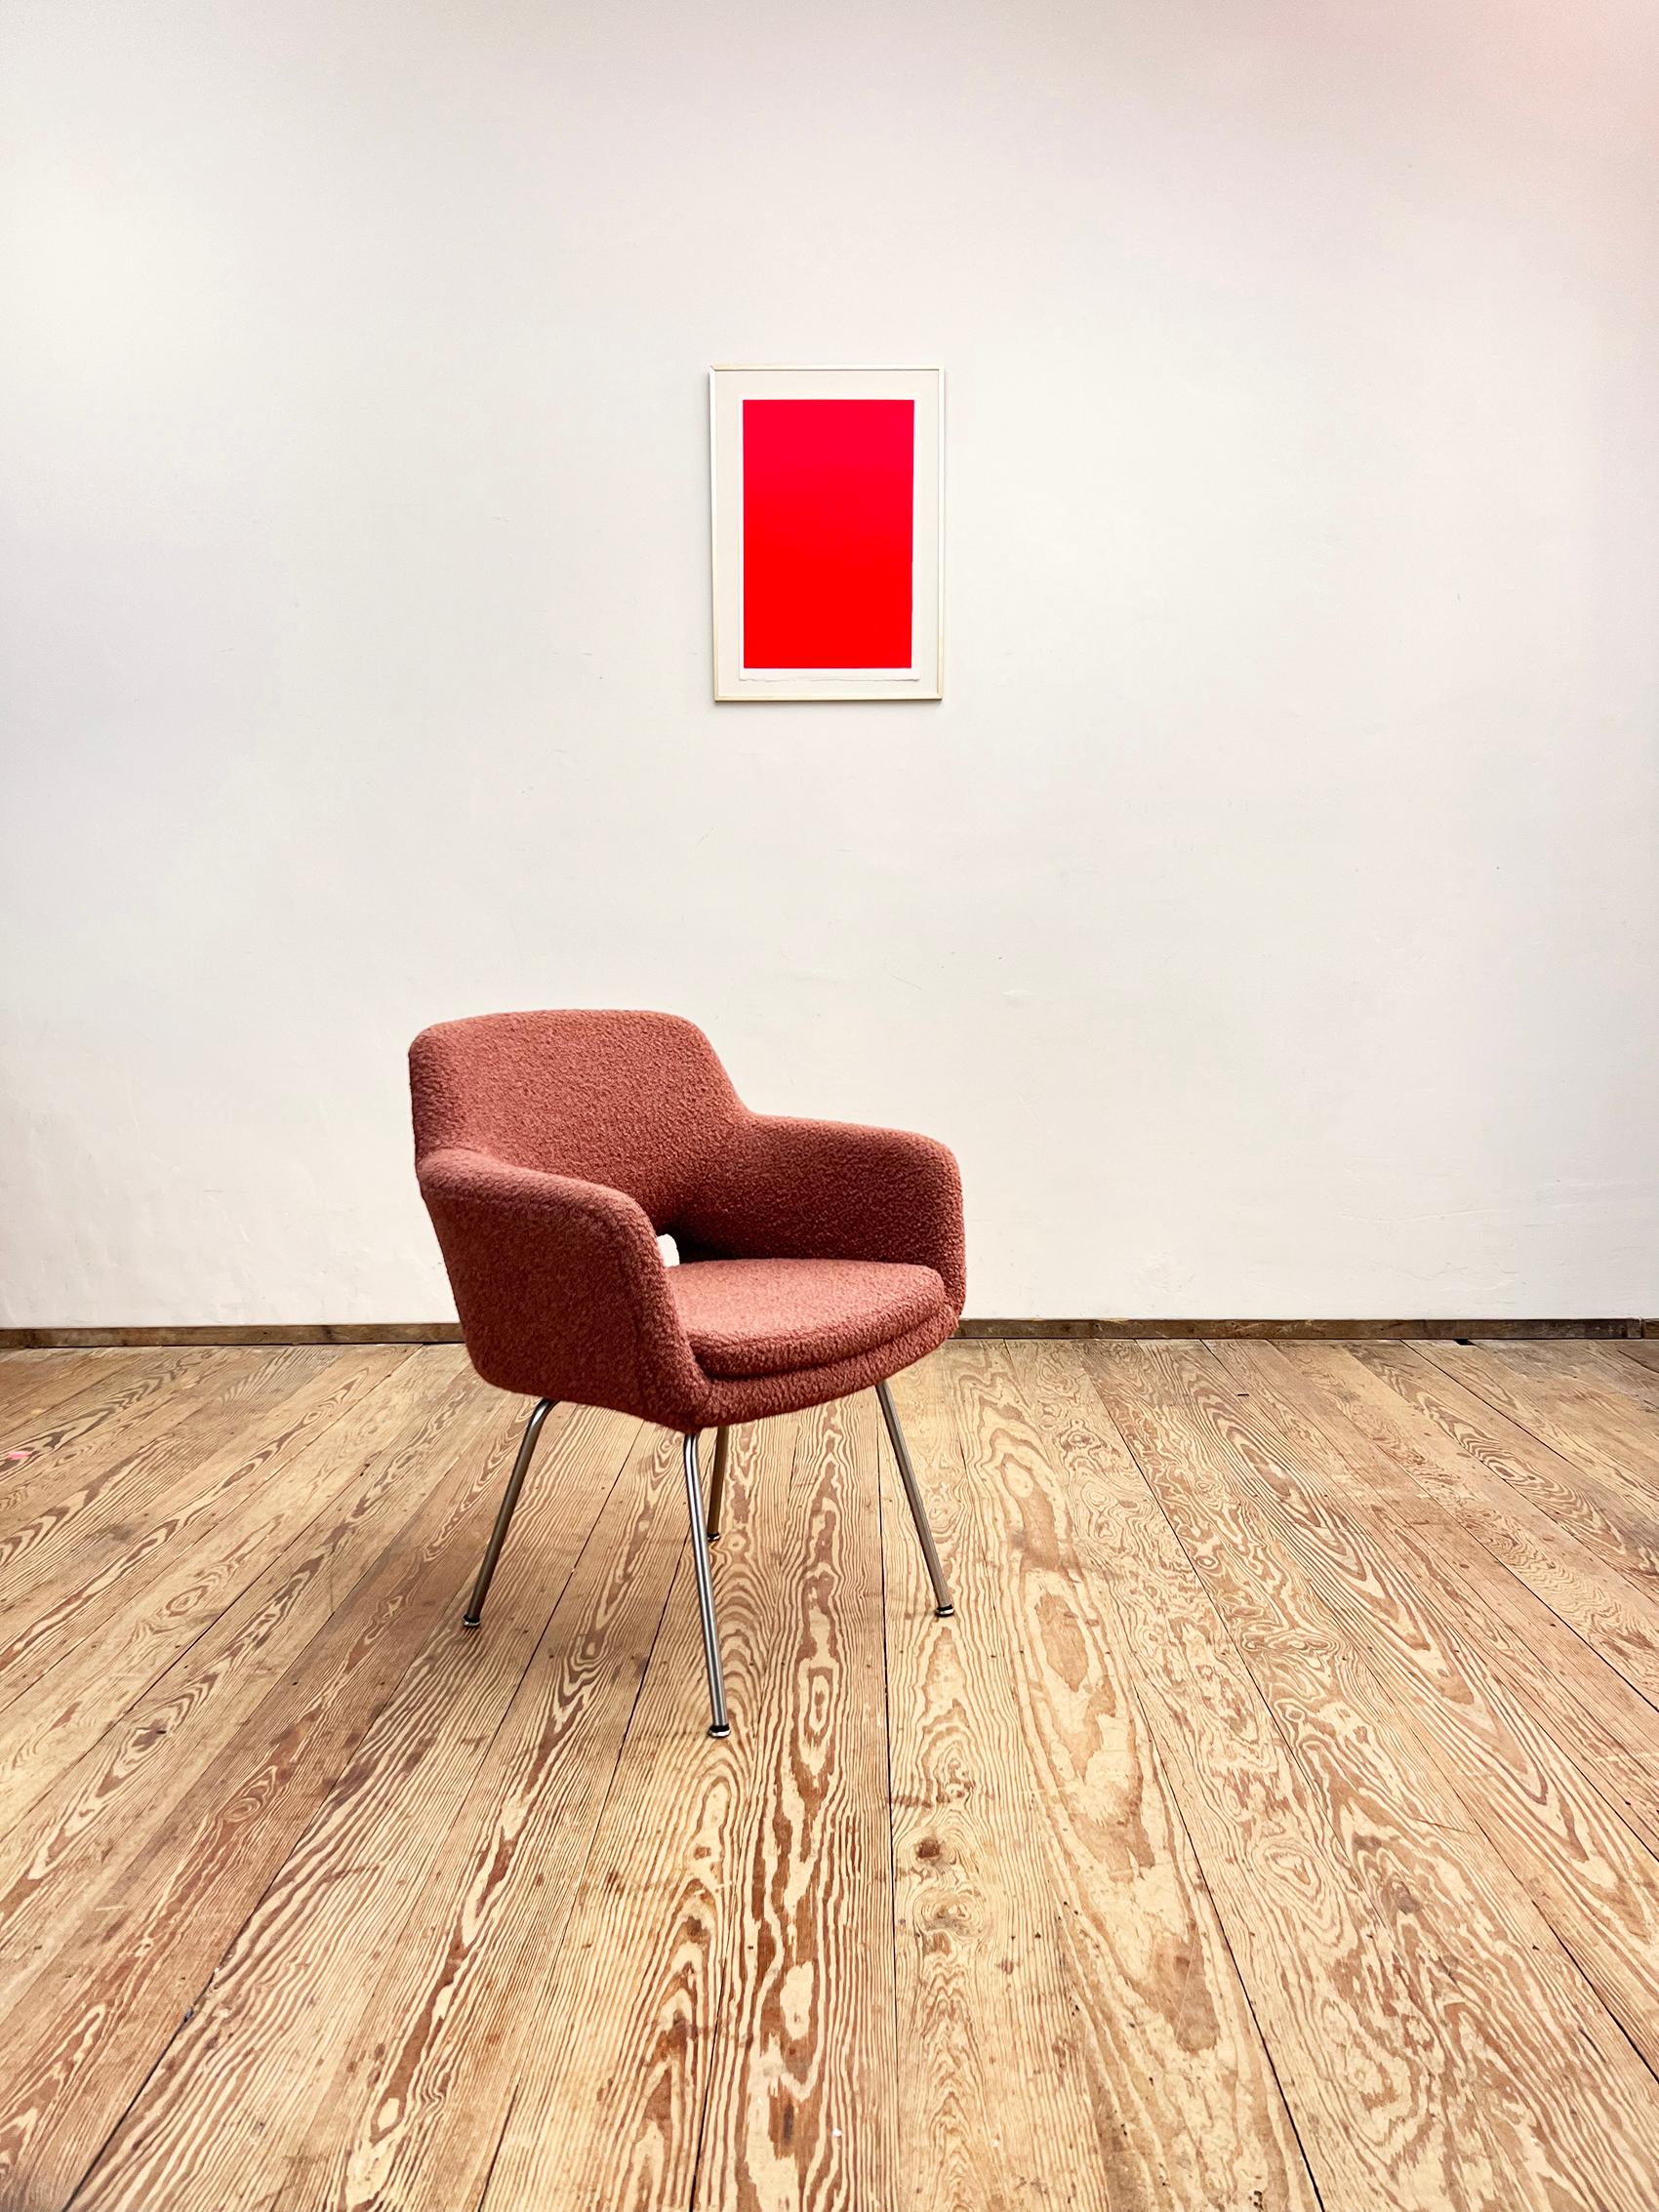 Dimensions: 64 x 60 x 75 x 45 cm (Width x Depth x Height x Seat Height)

This elegant armchair was designed by the Finnish designer Olli Mannermaa for Martela in the early 1950s and later produced by Cassina and Eugen Schmidt in Germany. The chair